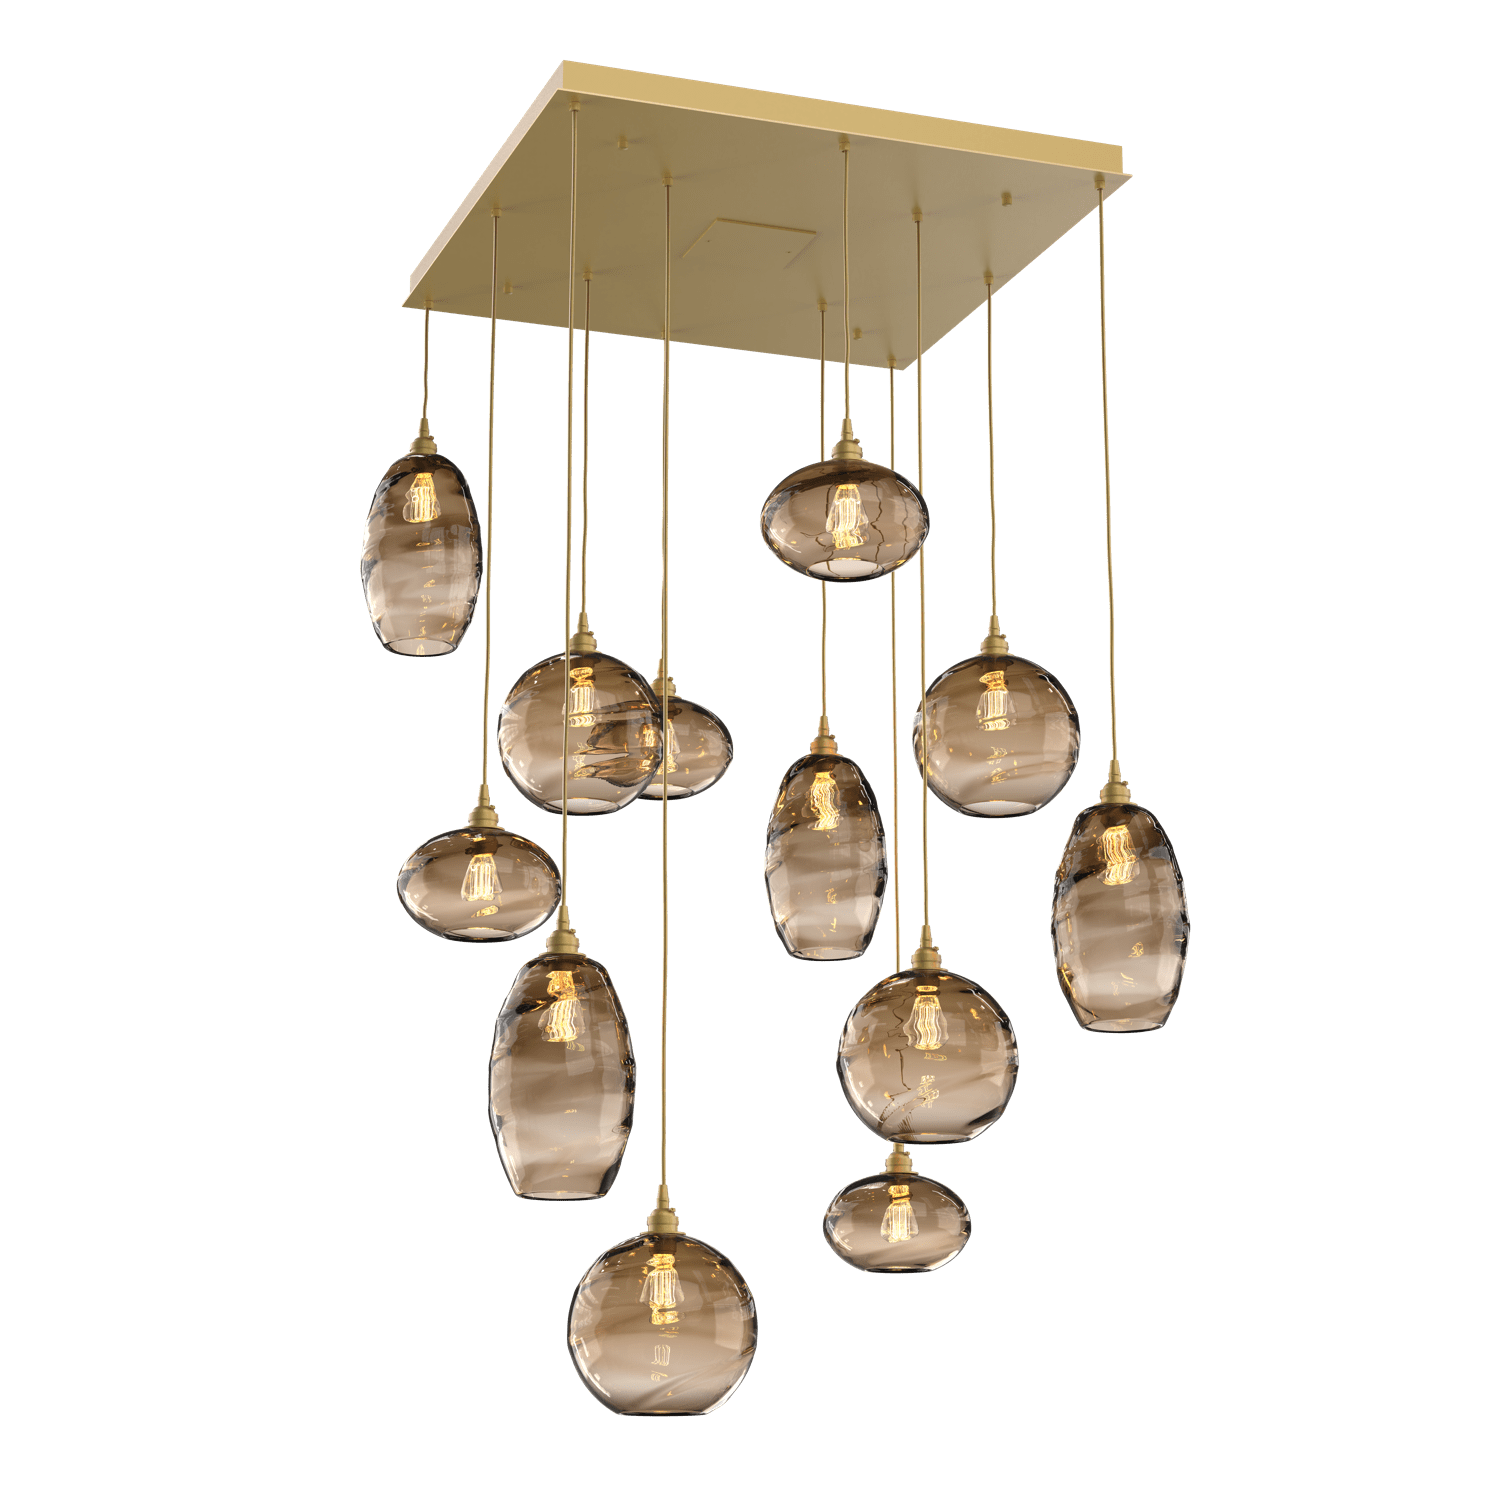 CHB0048-12-GB-OB-Hammerton-Studio-Optic-Blown-Glass-Misto-12-light-square-pendant-chandelier-with-gilded-brass-finish-and-optic-bronze-blown-glass-shades-and-incandescent-lamping